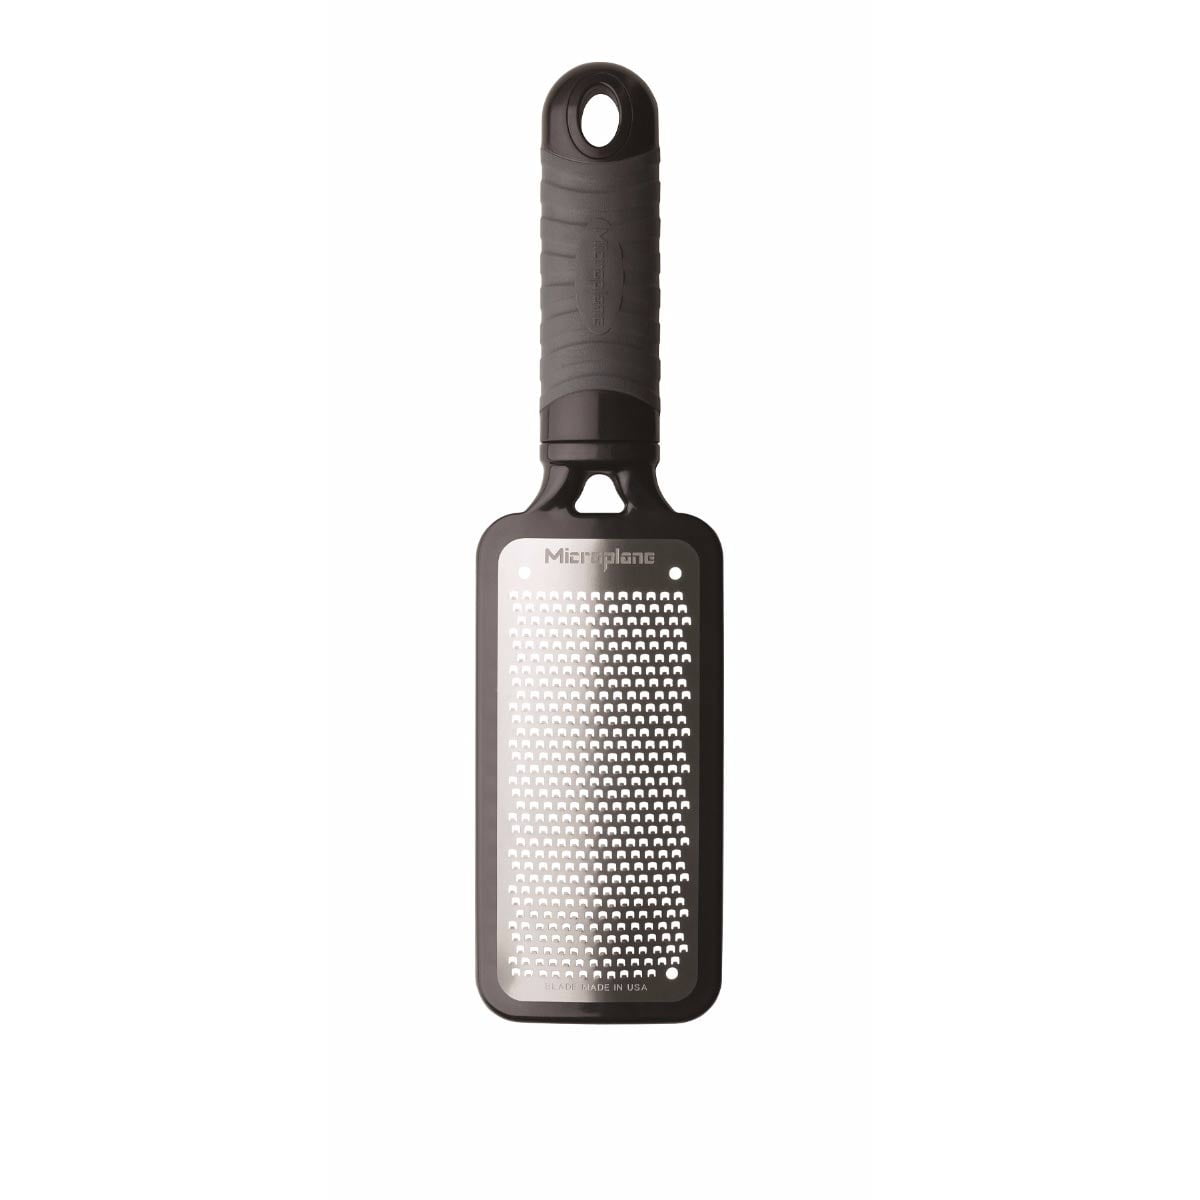 9 Smart Ways to Use a Microplane Grater